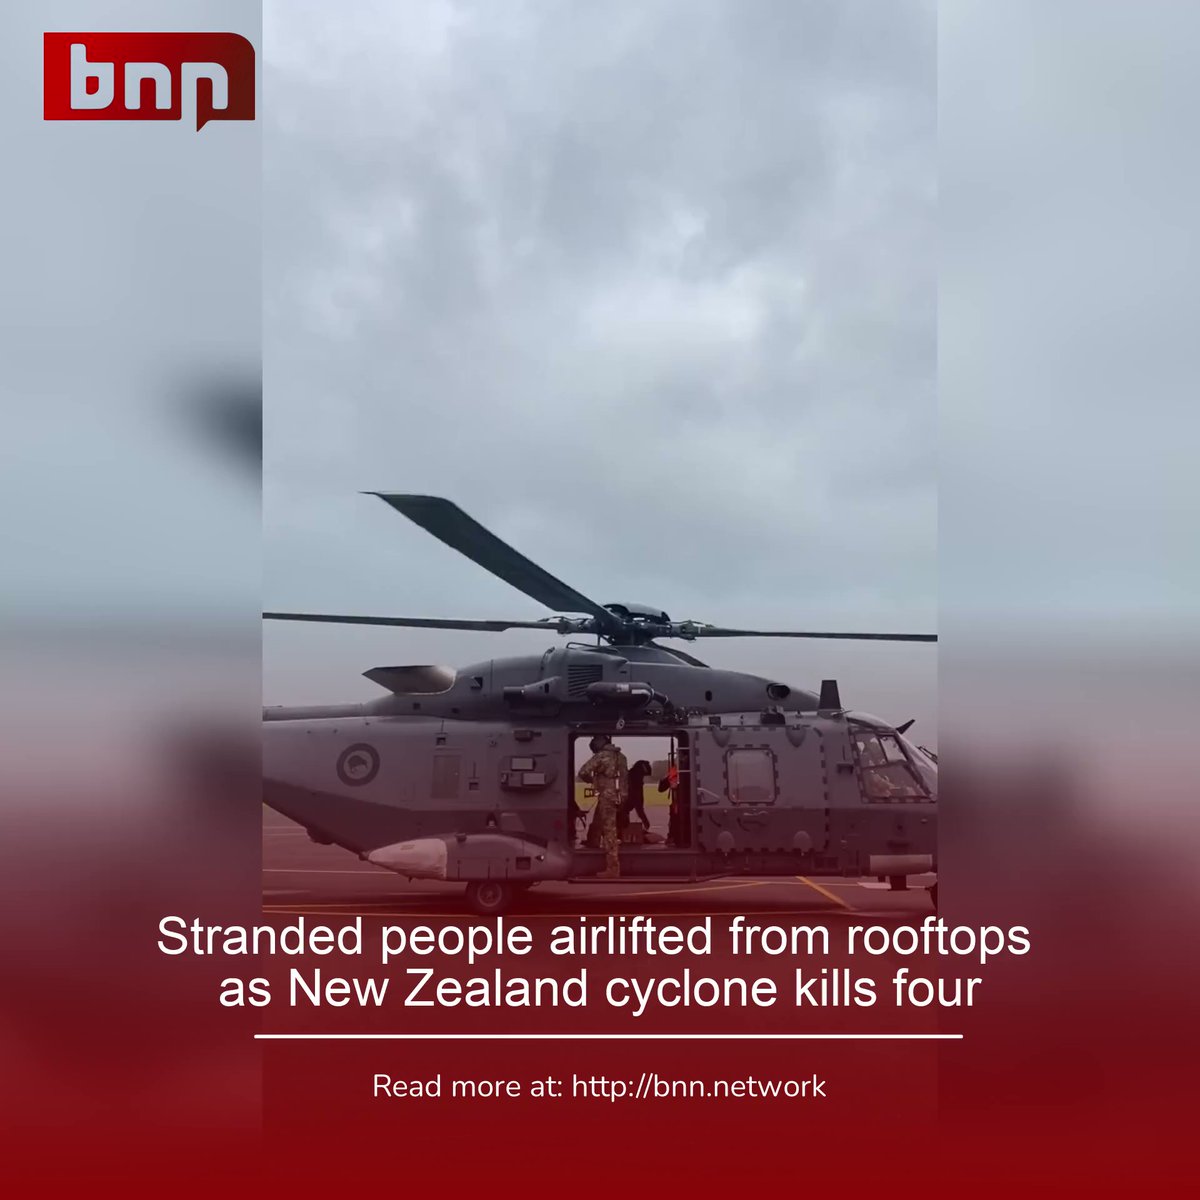 Stranded people were airlifted from their rooftops by a military helicopter in NewZealand on Wednesday after CycloneGabrielle killed at least three people and displaced thousands more